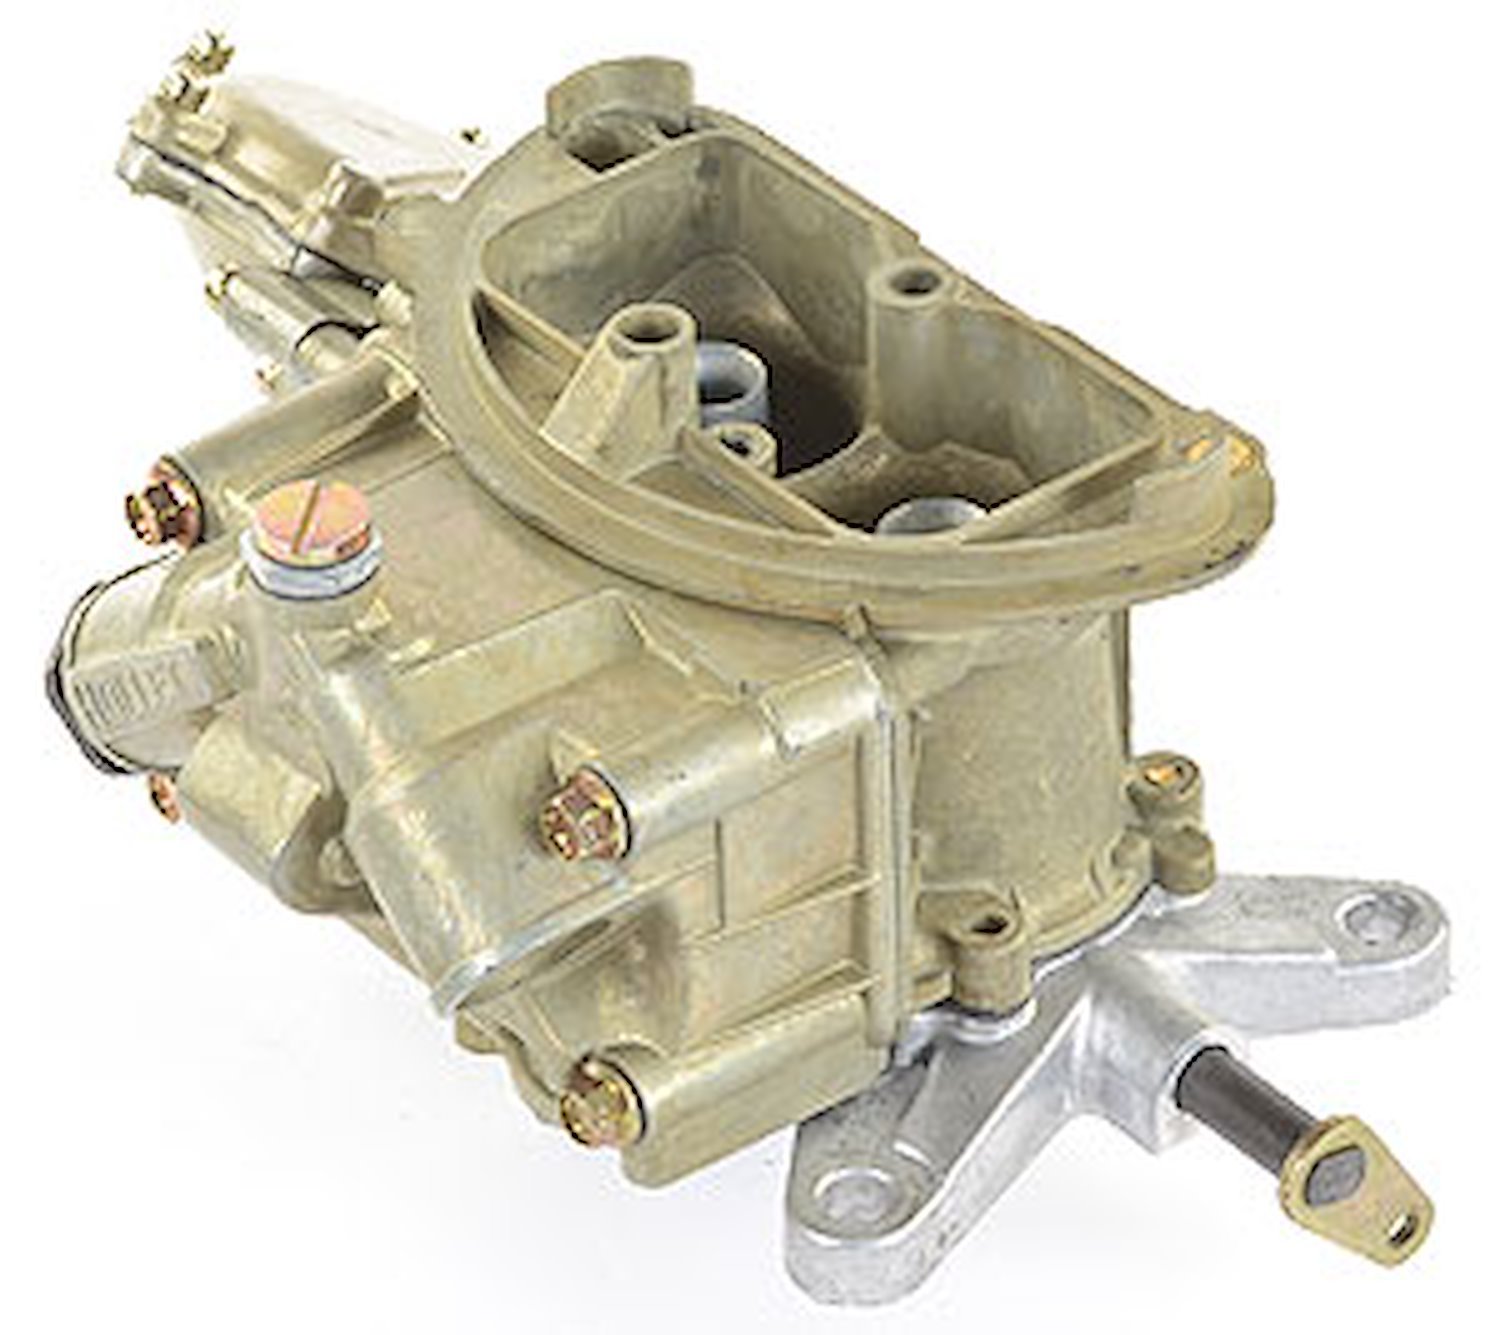 0-4365-1 Chrysler OE Muscle Car Carb For 1969-70 440/390 3x2 (Outboard Carb)